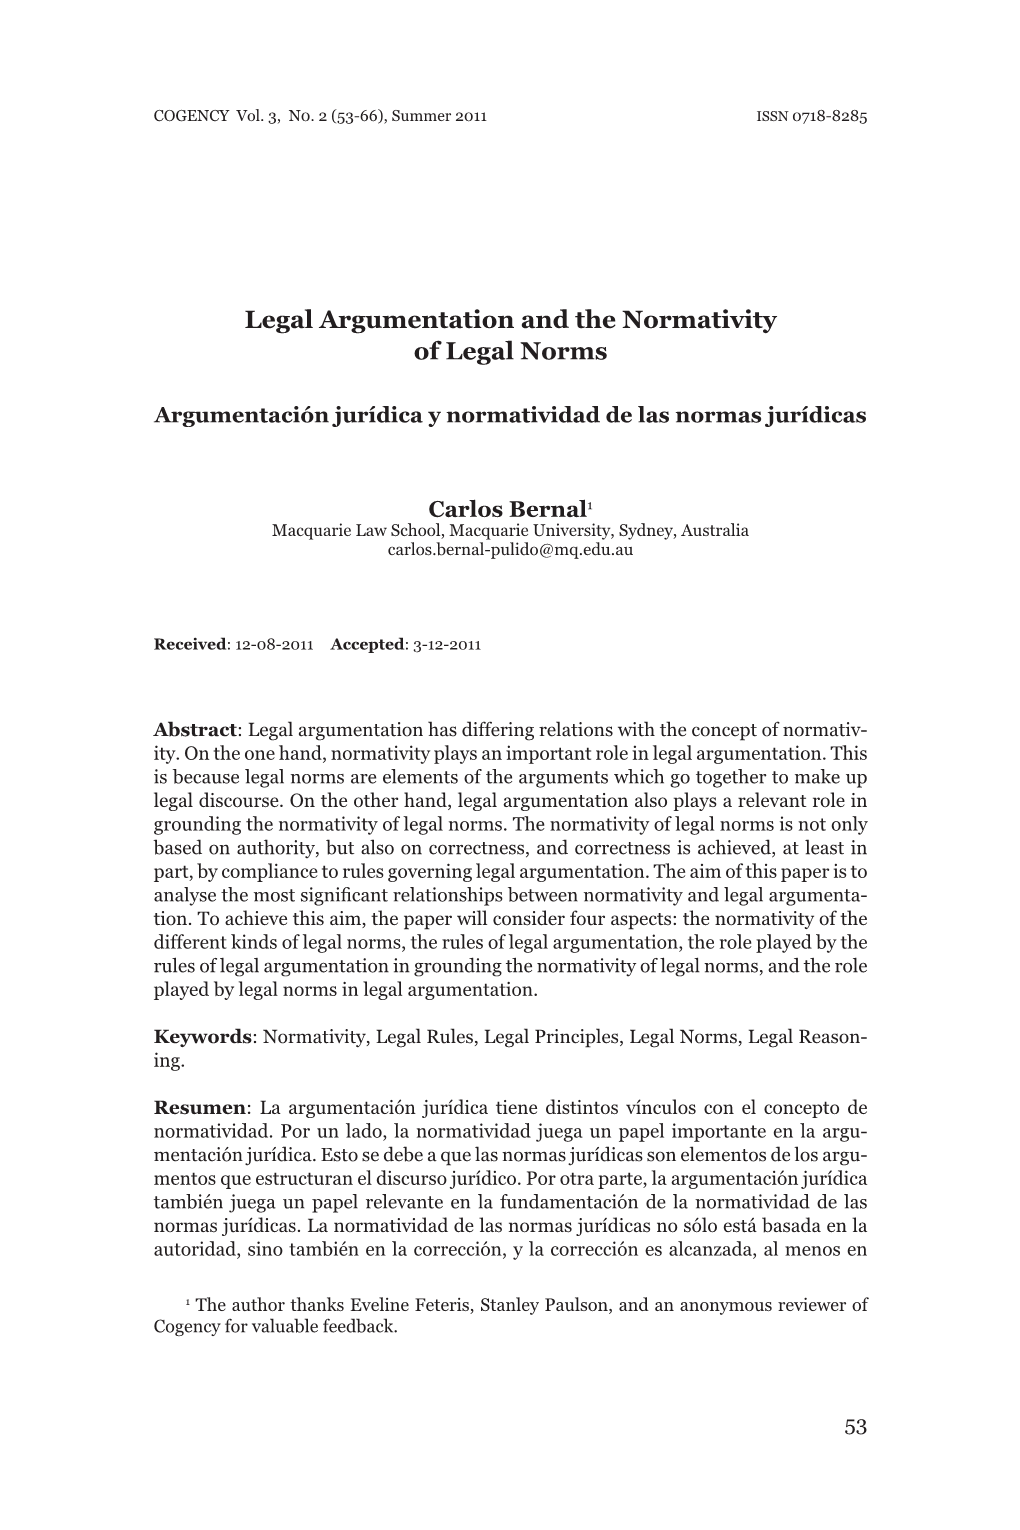 Legal Argumentation and the Normativity of Legal Norms